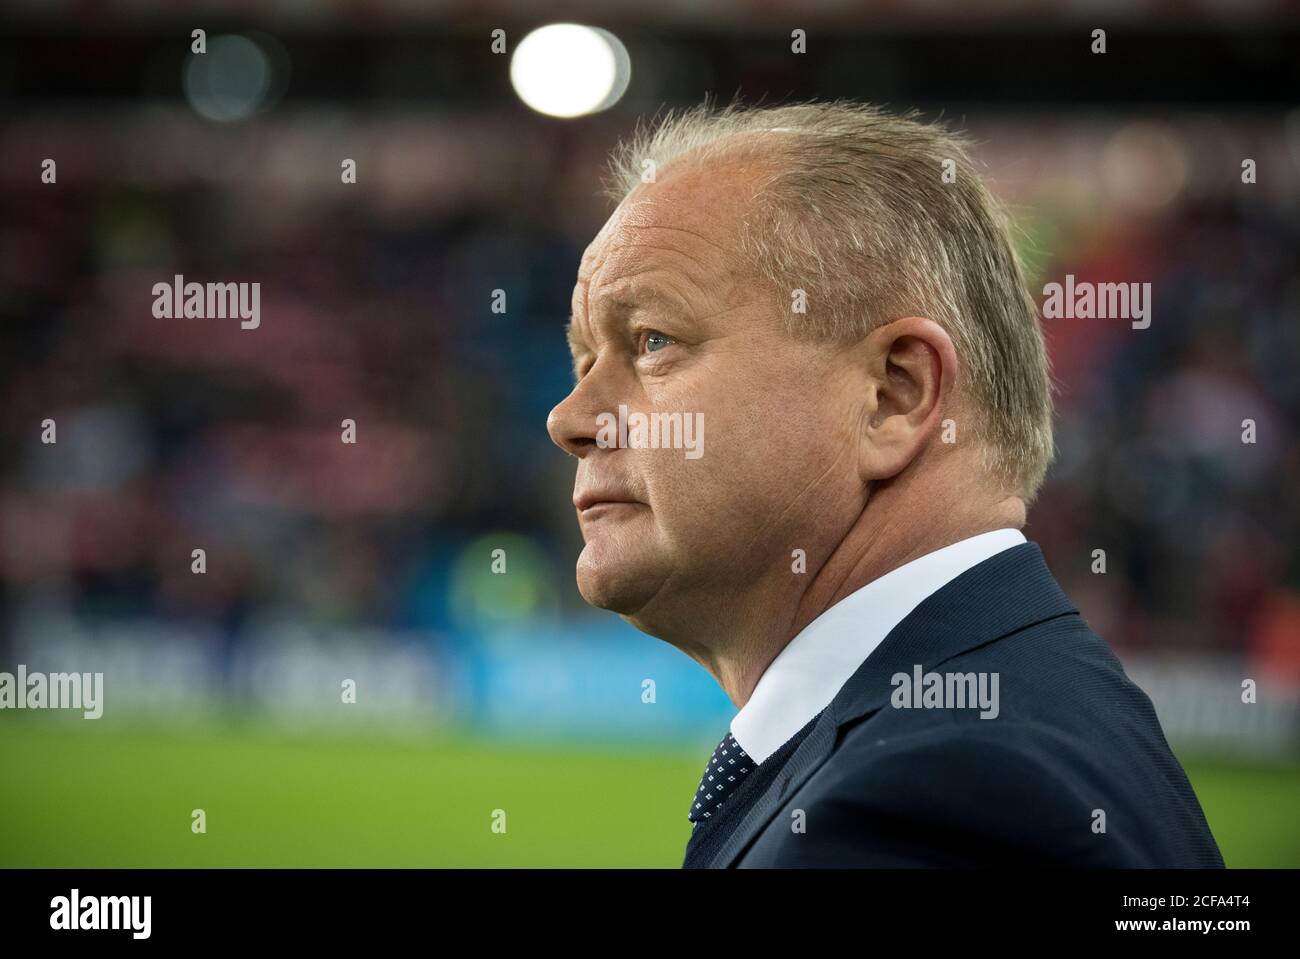 The Norwegian team manager Per-Mathias Høgmo seen at the sideline during the UEFA Euro 2016 play-off match between Norway and Hungary at Ullevaal in Oslo (Gonzales Photo/Jan-Erik Eriksen). Stock Photo